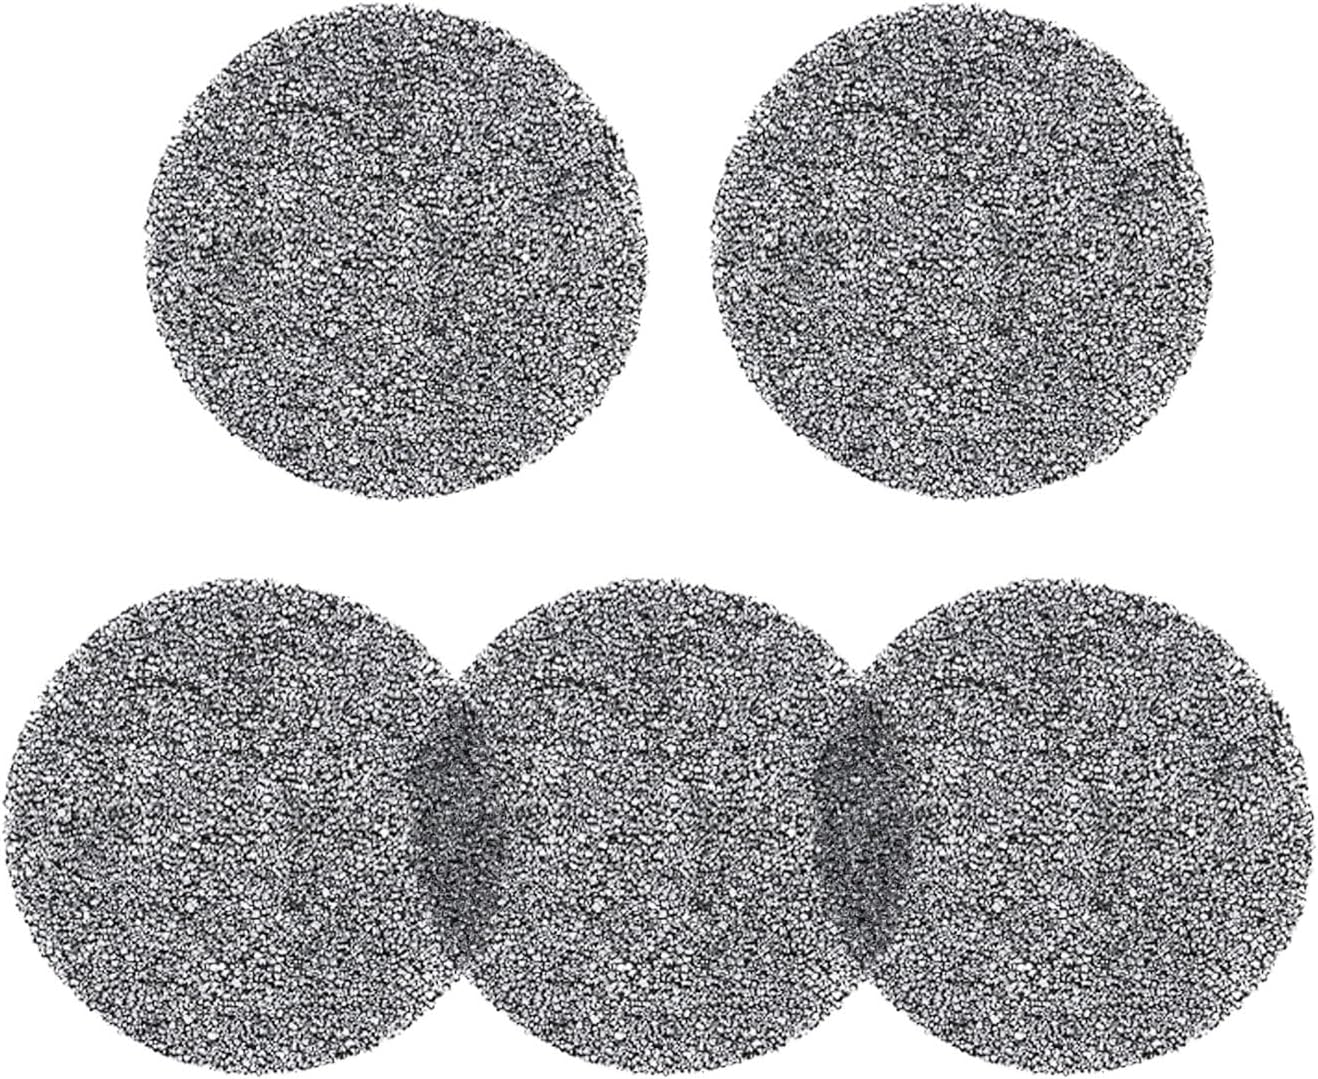 Zomagas Desktop Range Hood Carbon Filter x5, Replacement Charcoal Filter for Ductless Range Hood, Set of 5, ZMS-TBX8-F5